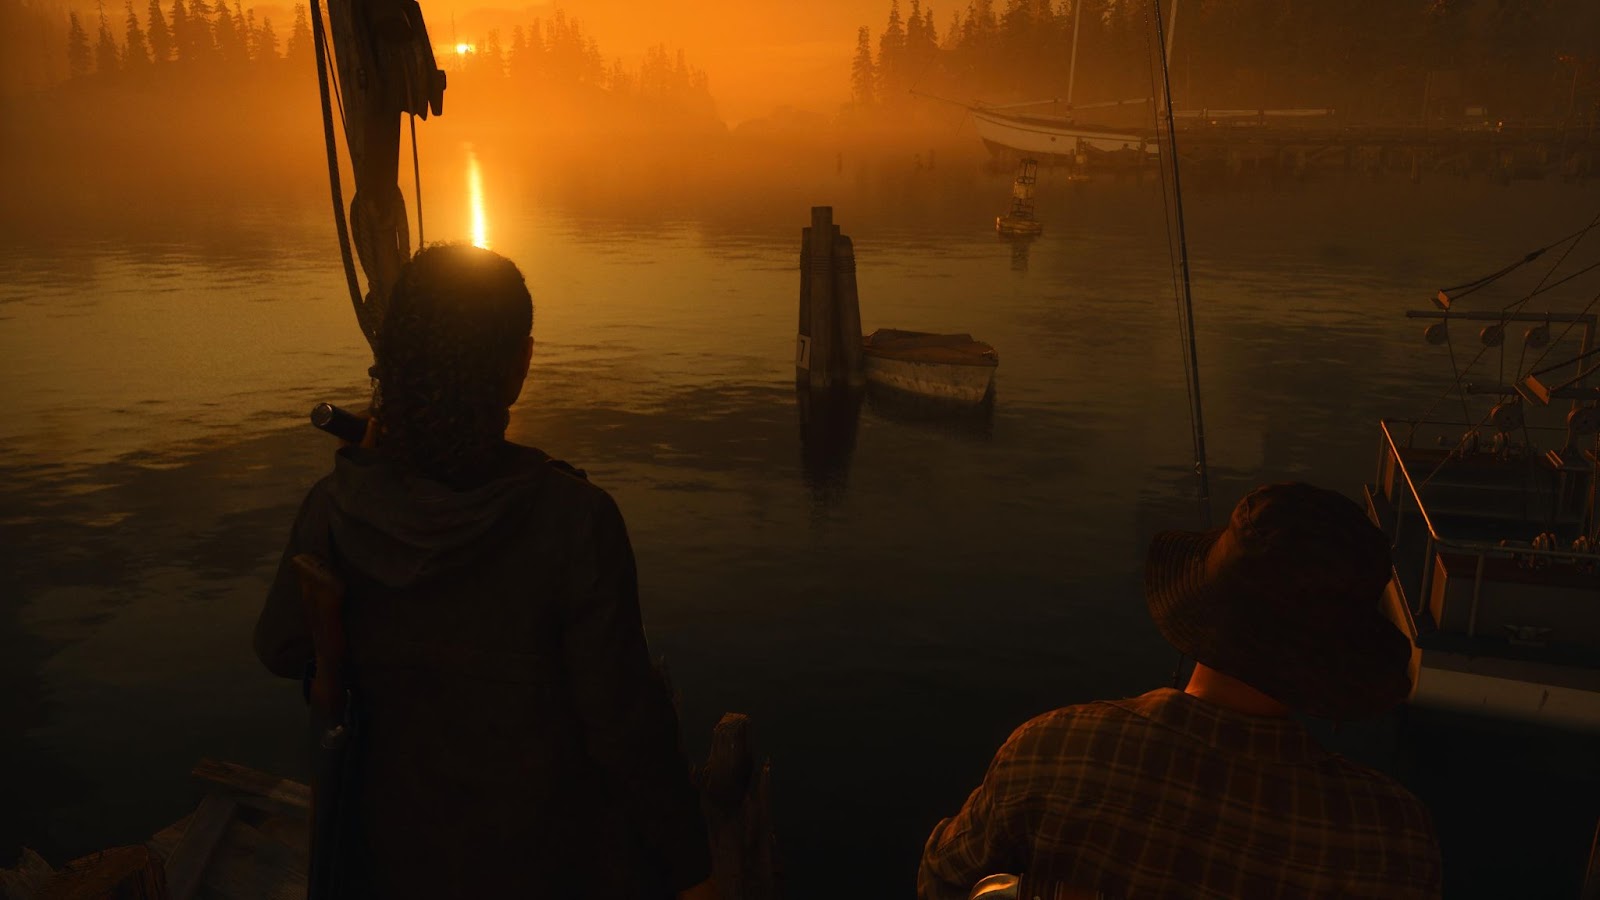 An in game screenshot of the harbor in Bright Falls from Alan Wake 2